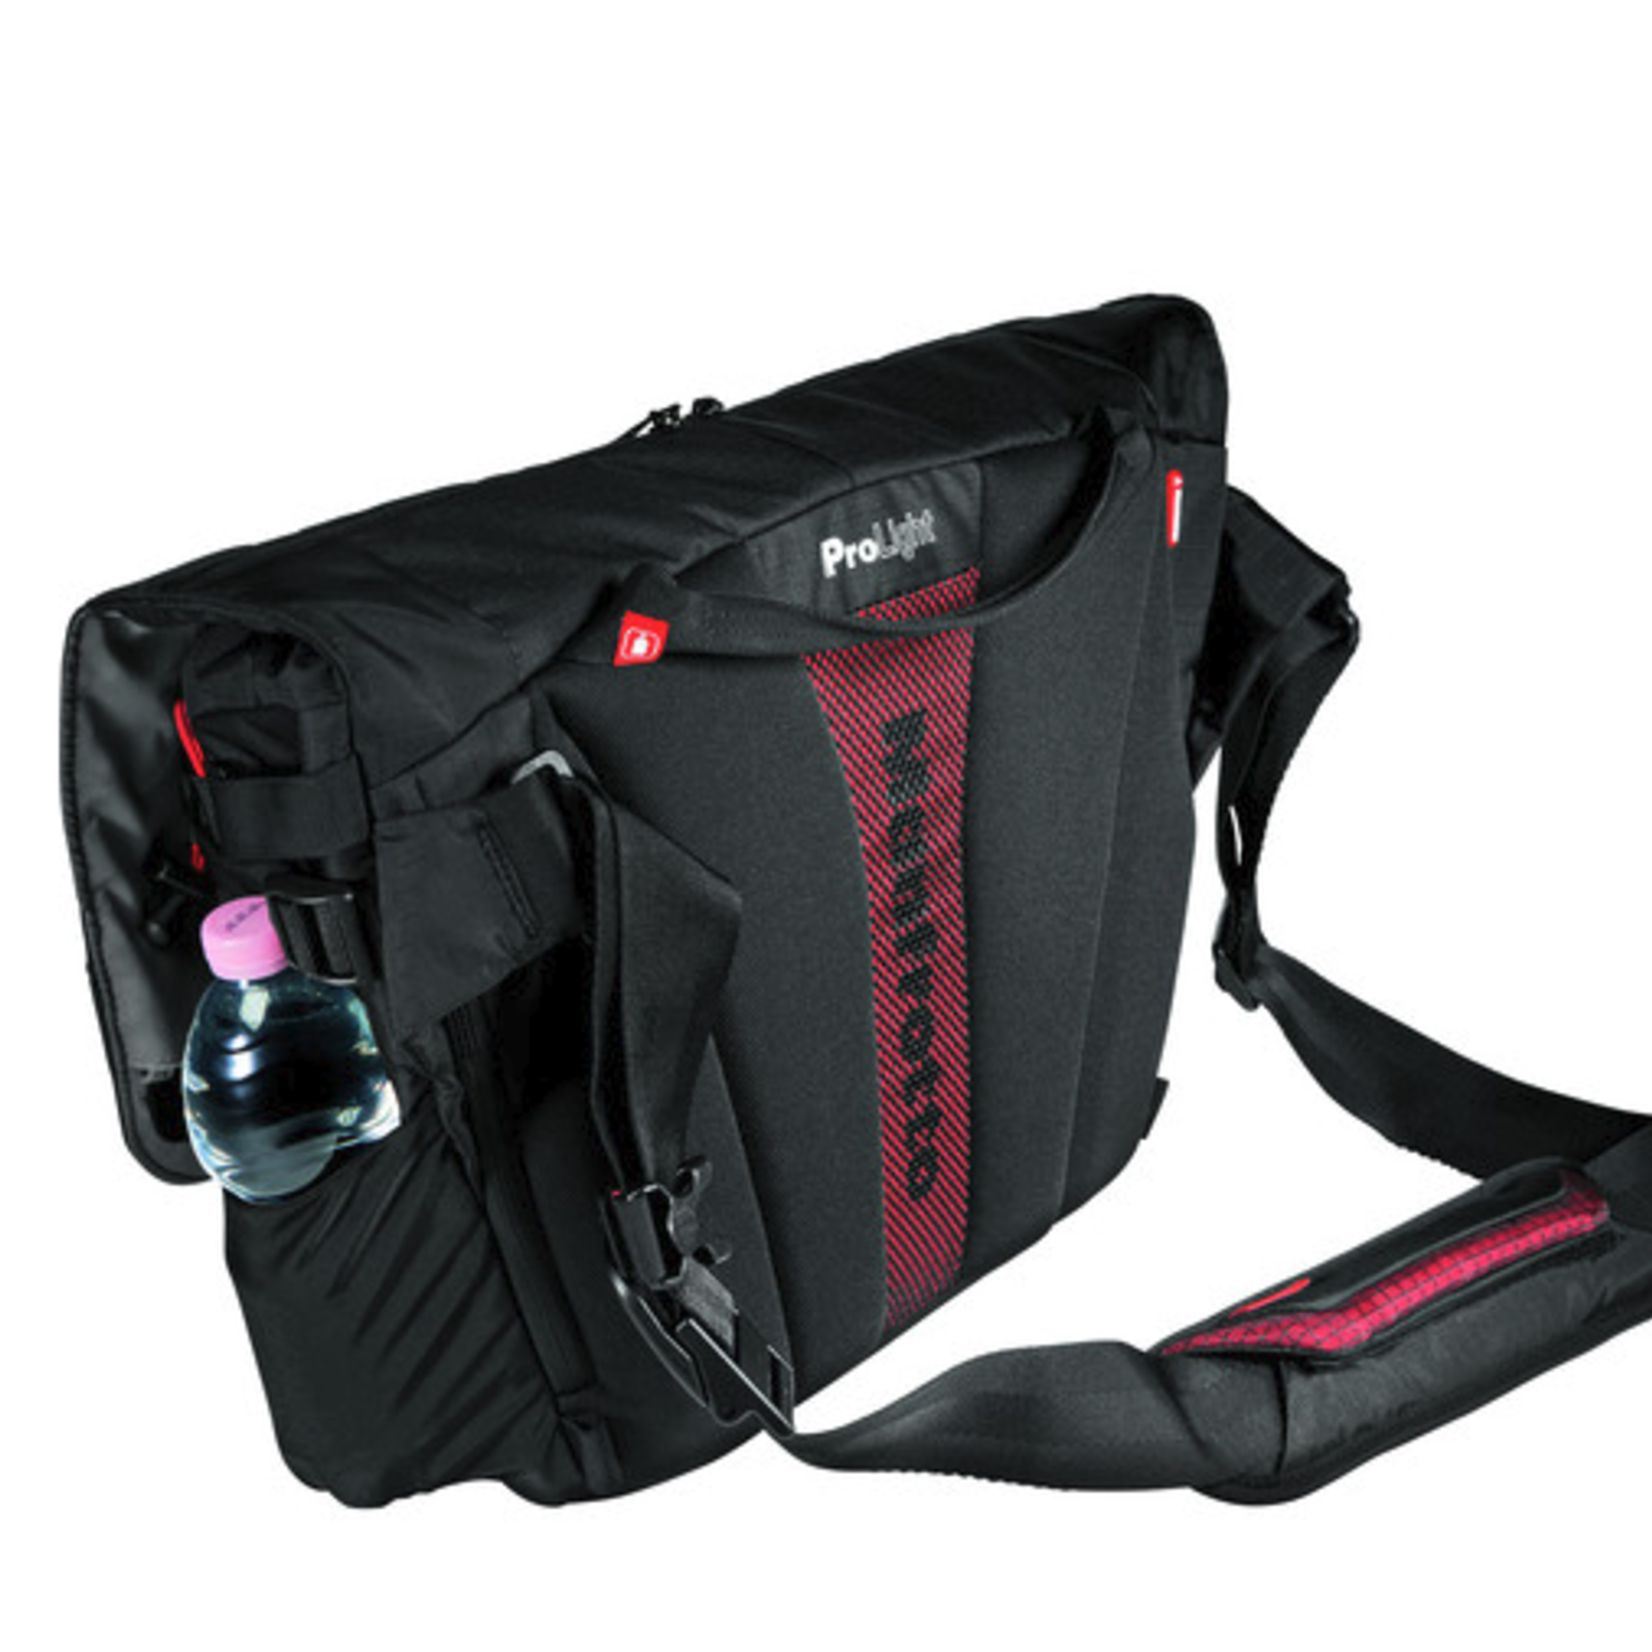 Manfrotto Manfrotto Pro Light Bumblebee M-30 Camera Bag (Black)